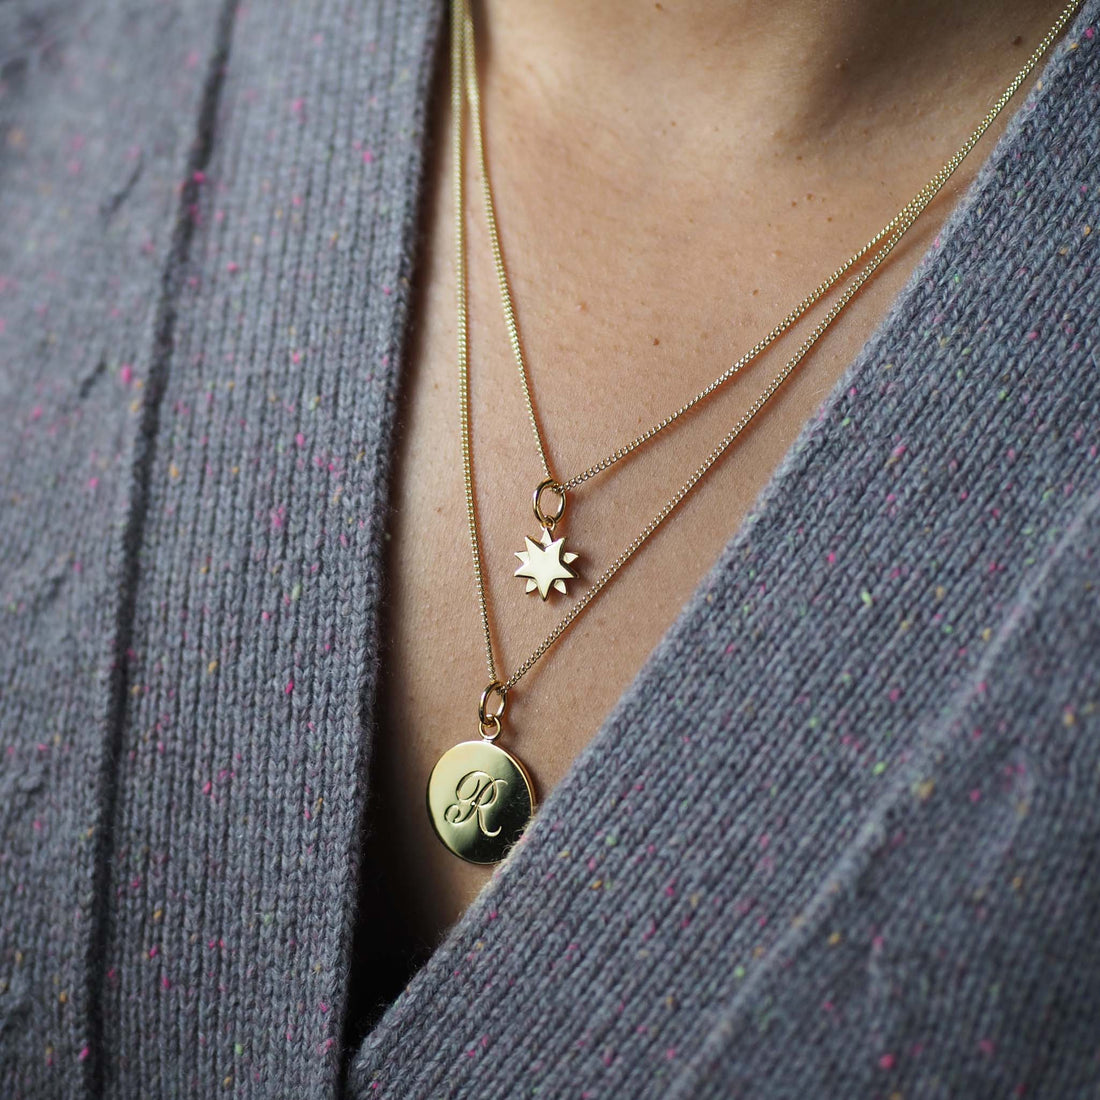 Starbright Necklace in Silver or Gold Vermeil